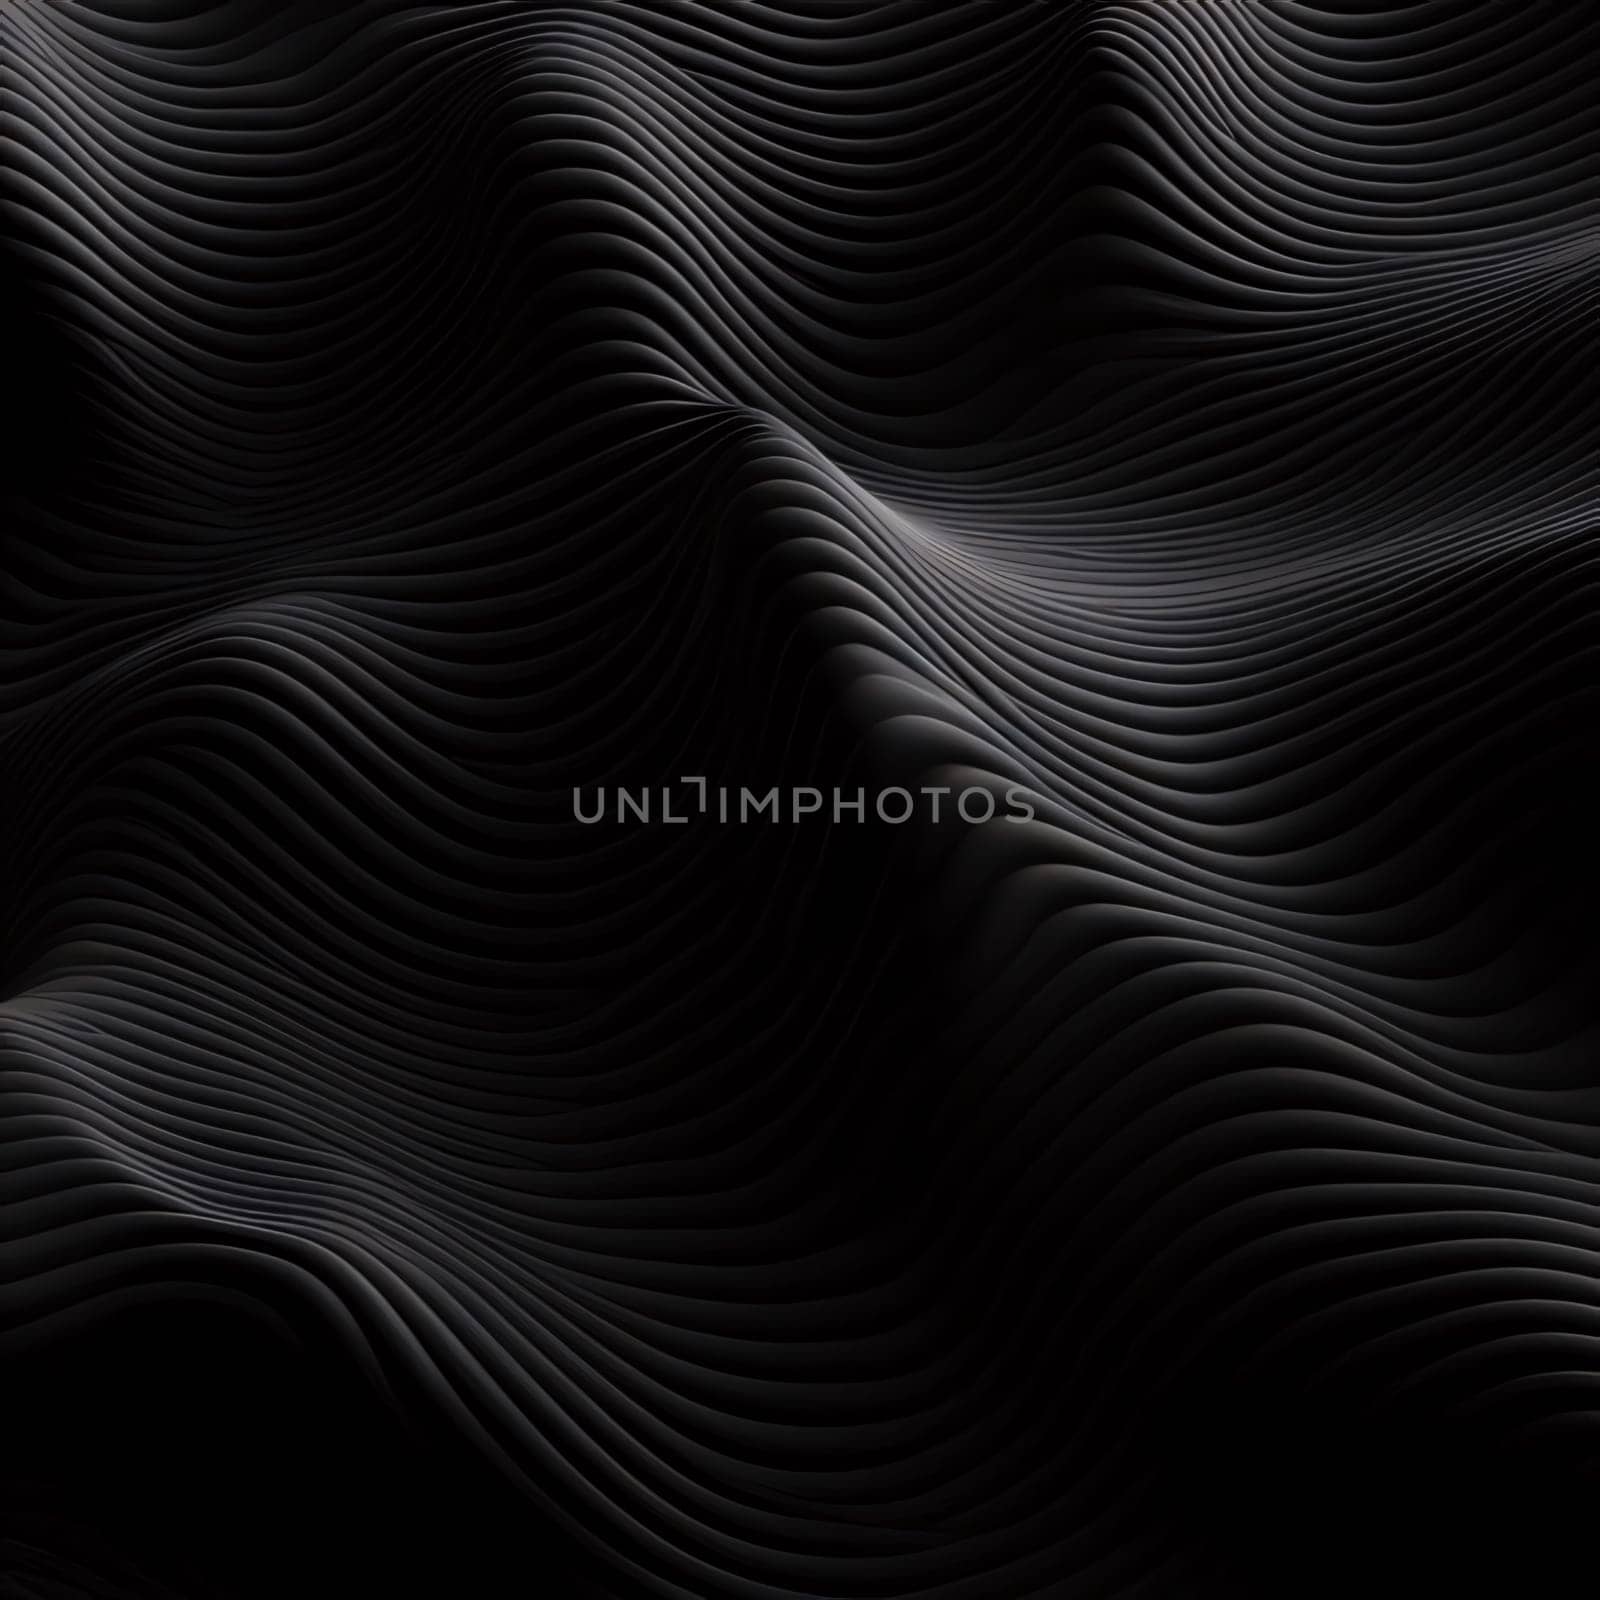 Abstract background design: Black wavy background. Abstract futuristic fractal image. Computer generated graphics.